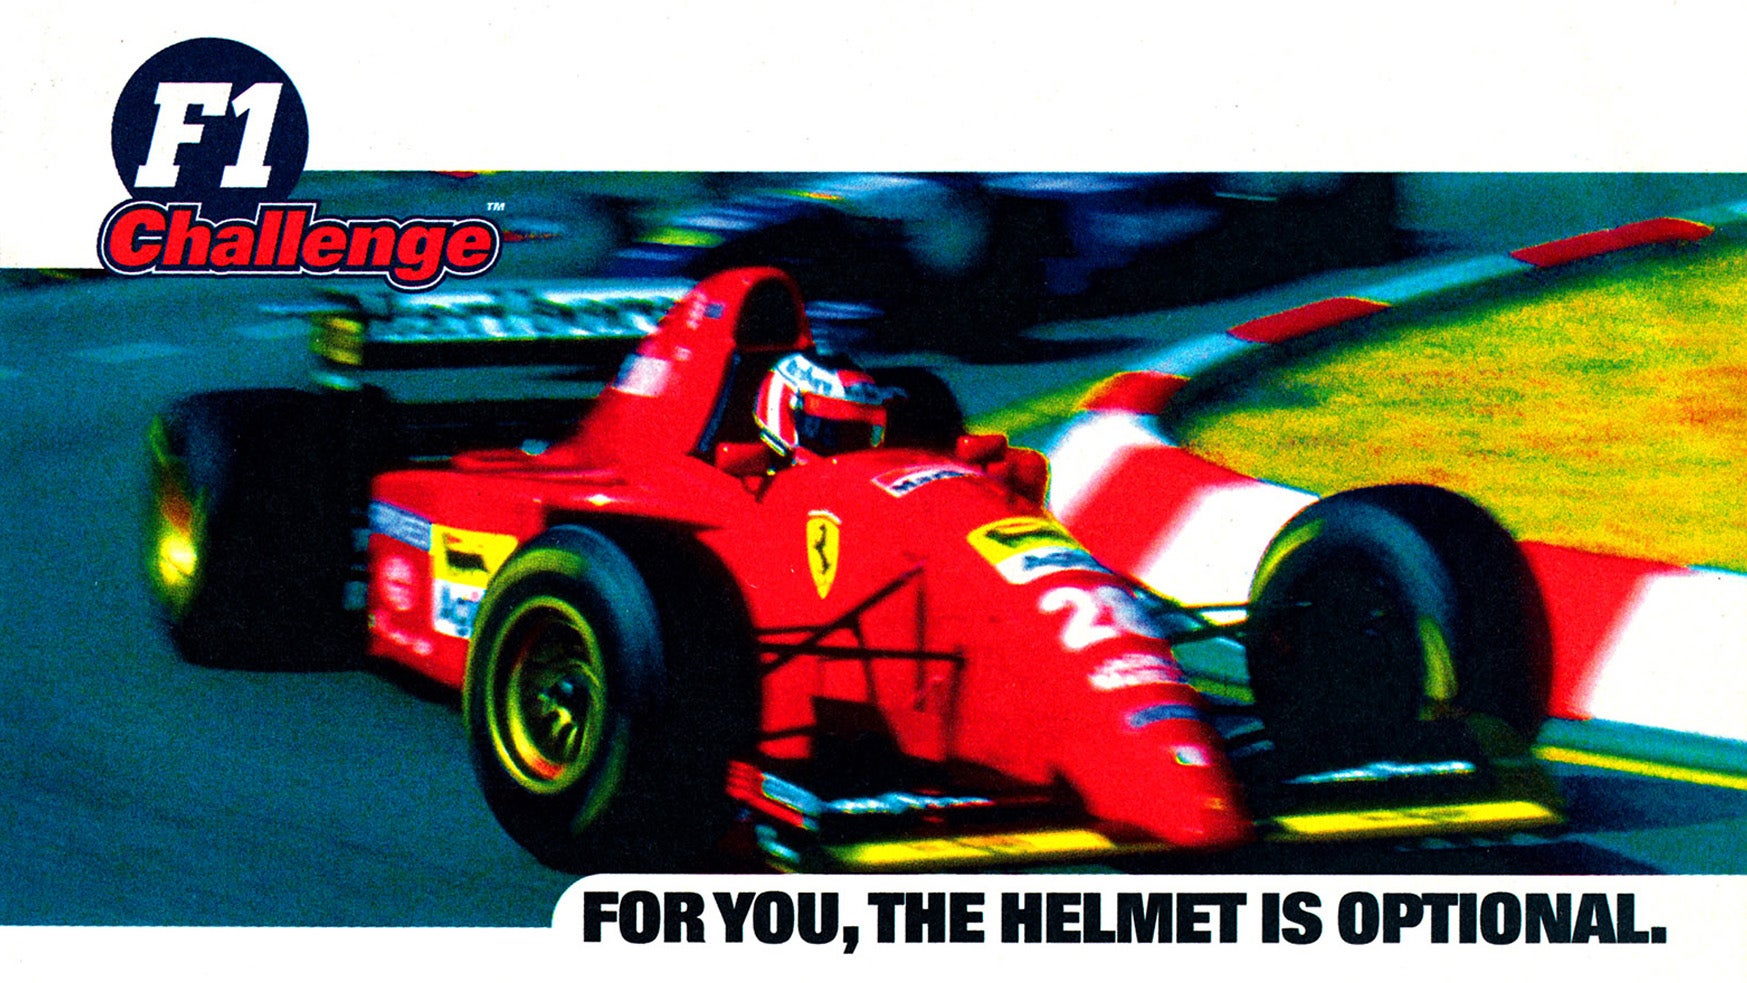 30 years later, F1 Challenge still stands as an ambitious Grand Prix simulator.